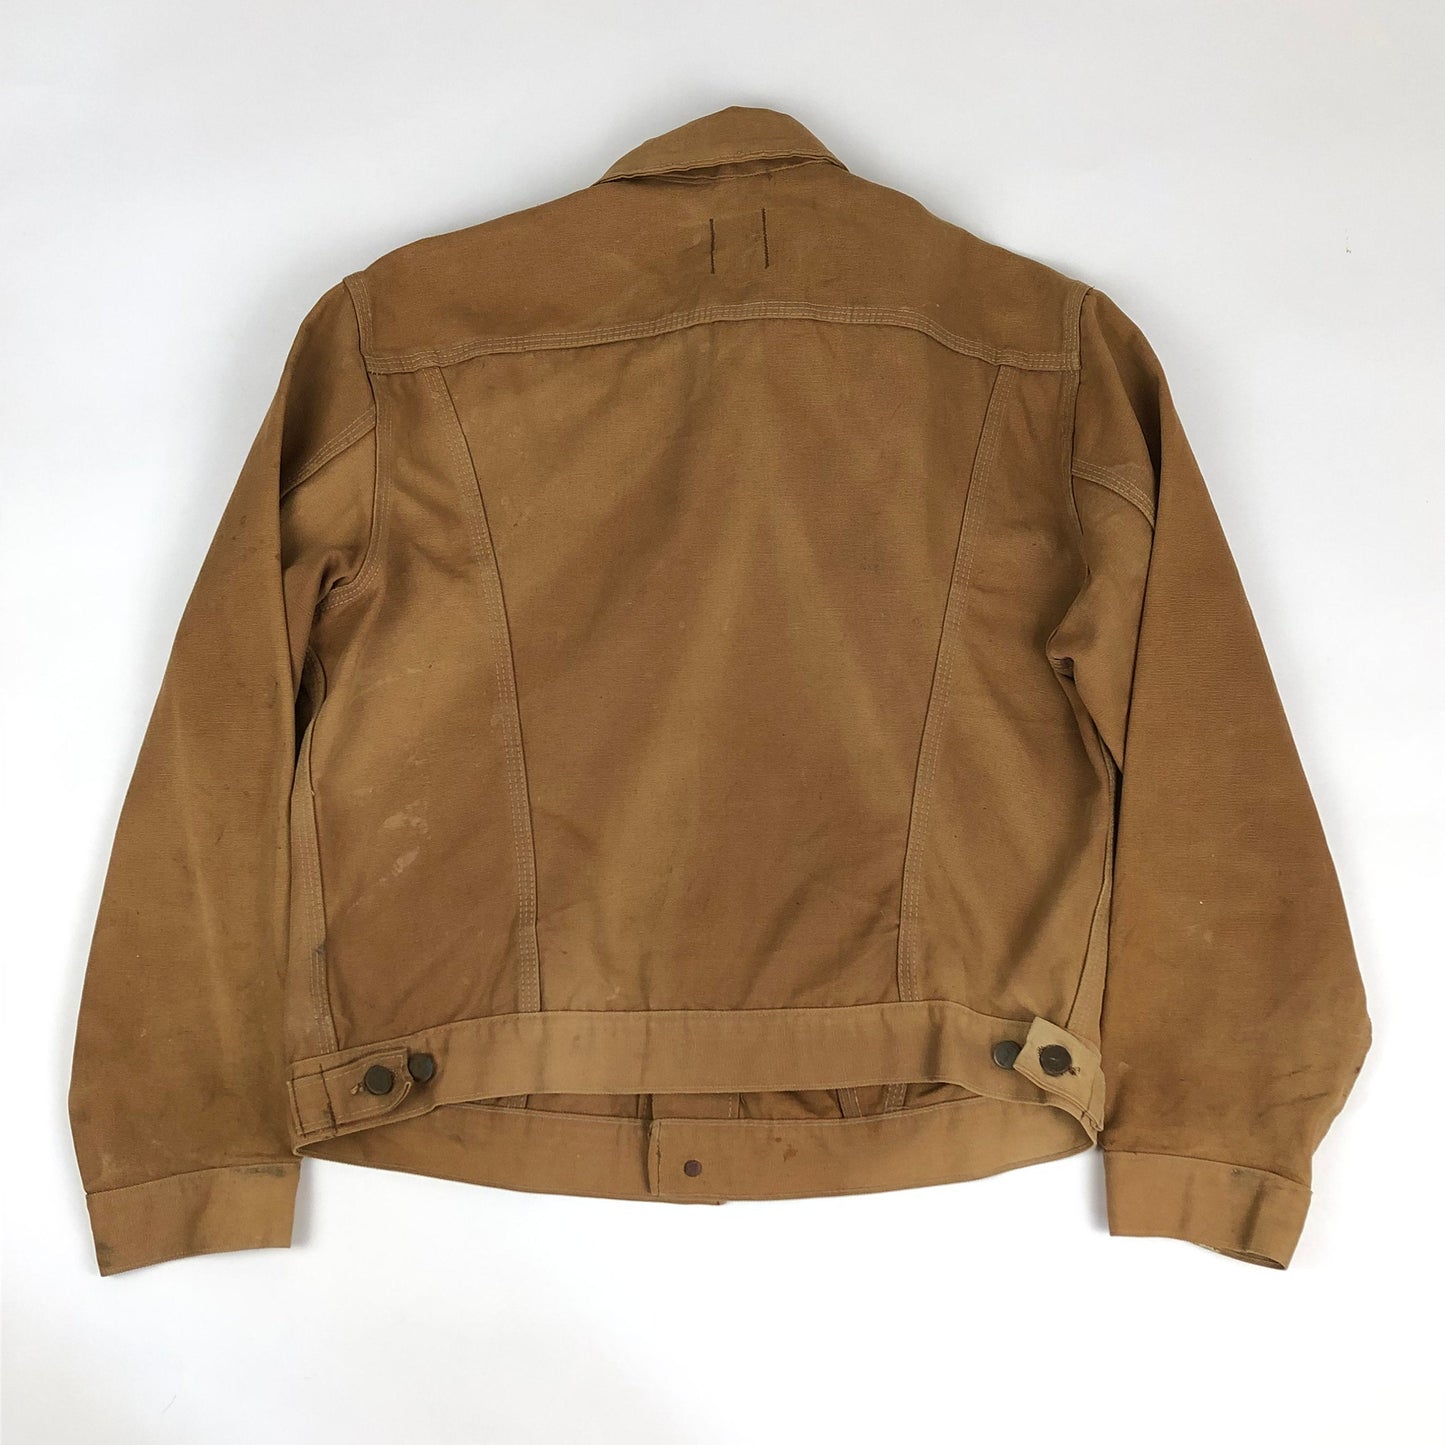 1970s Carhartt Type 3 Style 2 Pocket Trucker Jacket Made in USA Size M/L